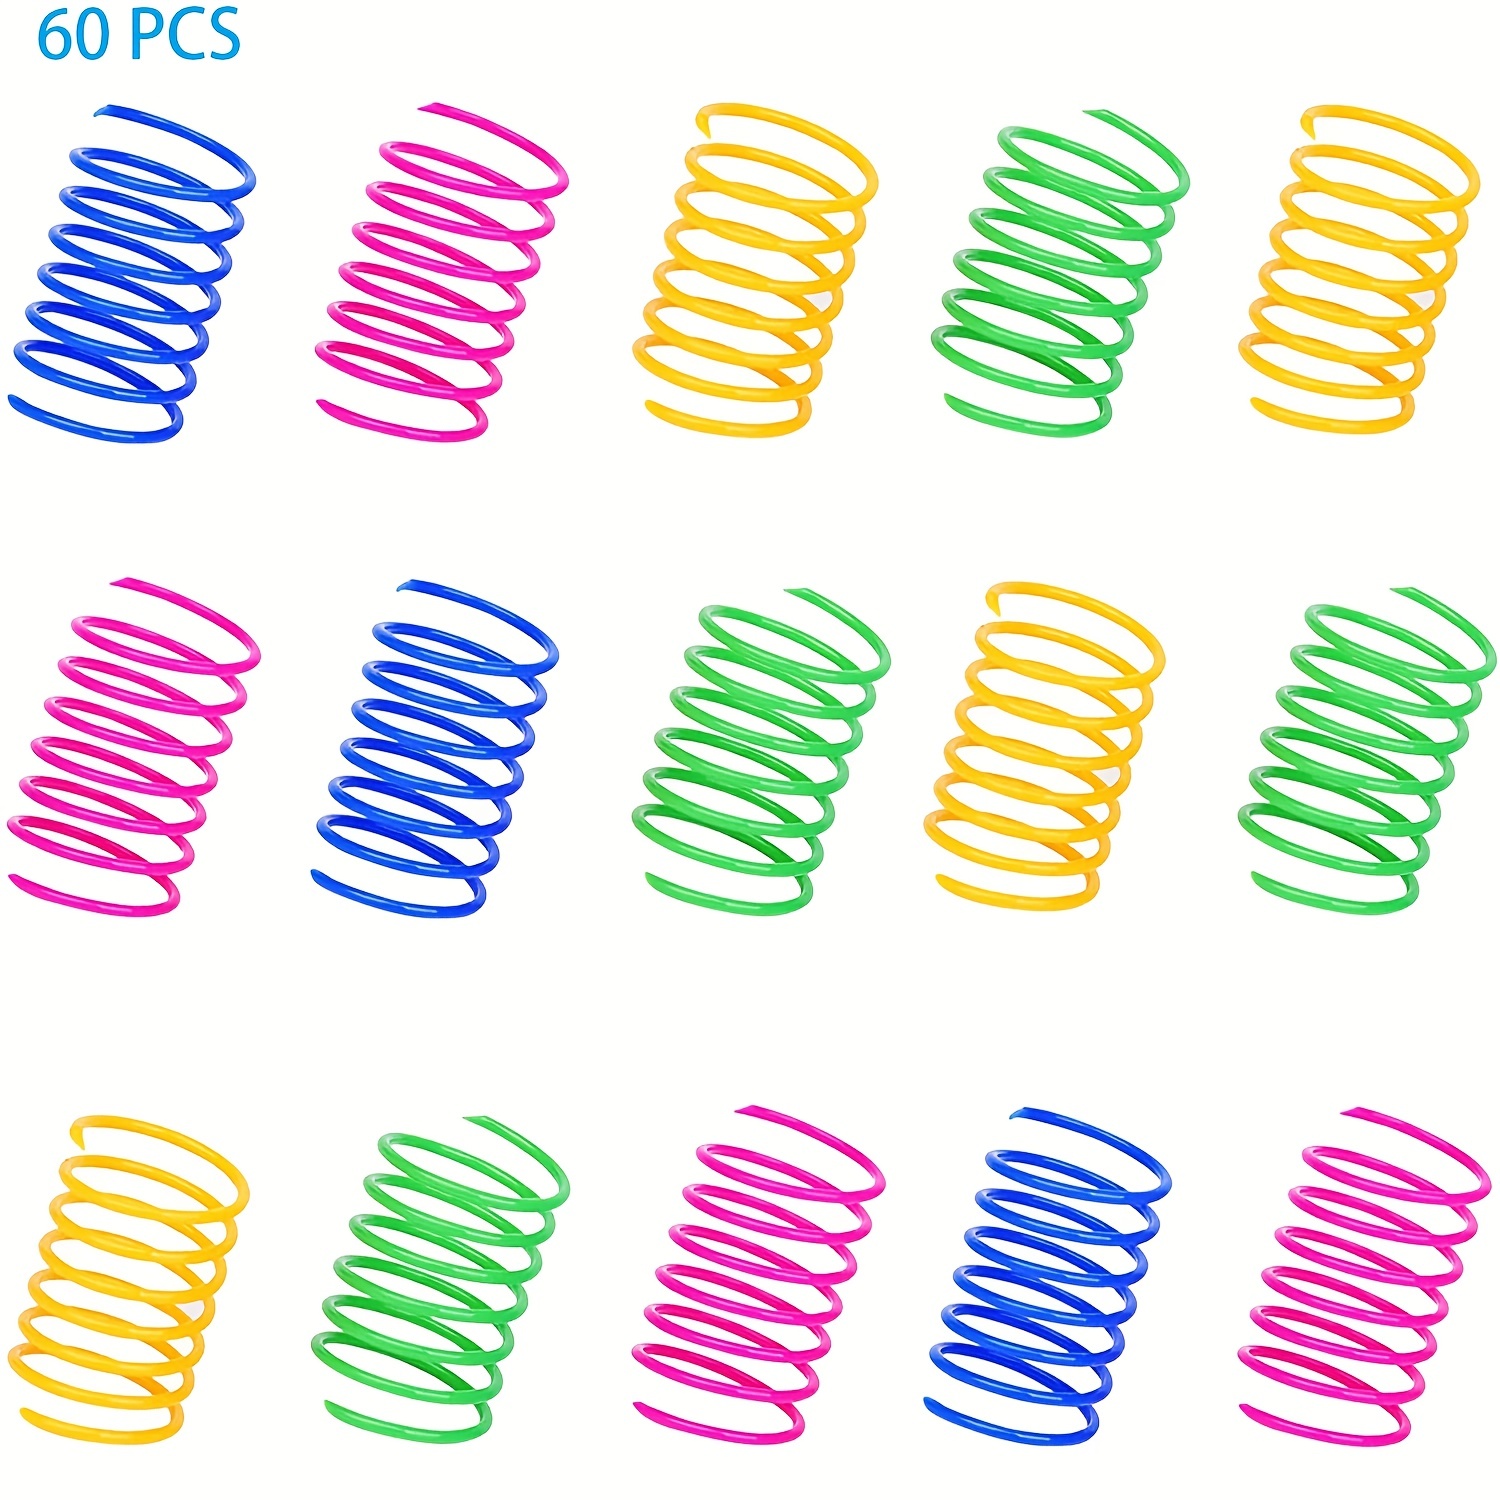 

60pcs Pet Wide Colorful Springs Cat Toys, Plastic Coil Spiral Springs For Cat, Kitten, Pets (assorted Varieties)